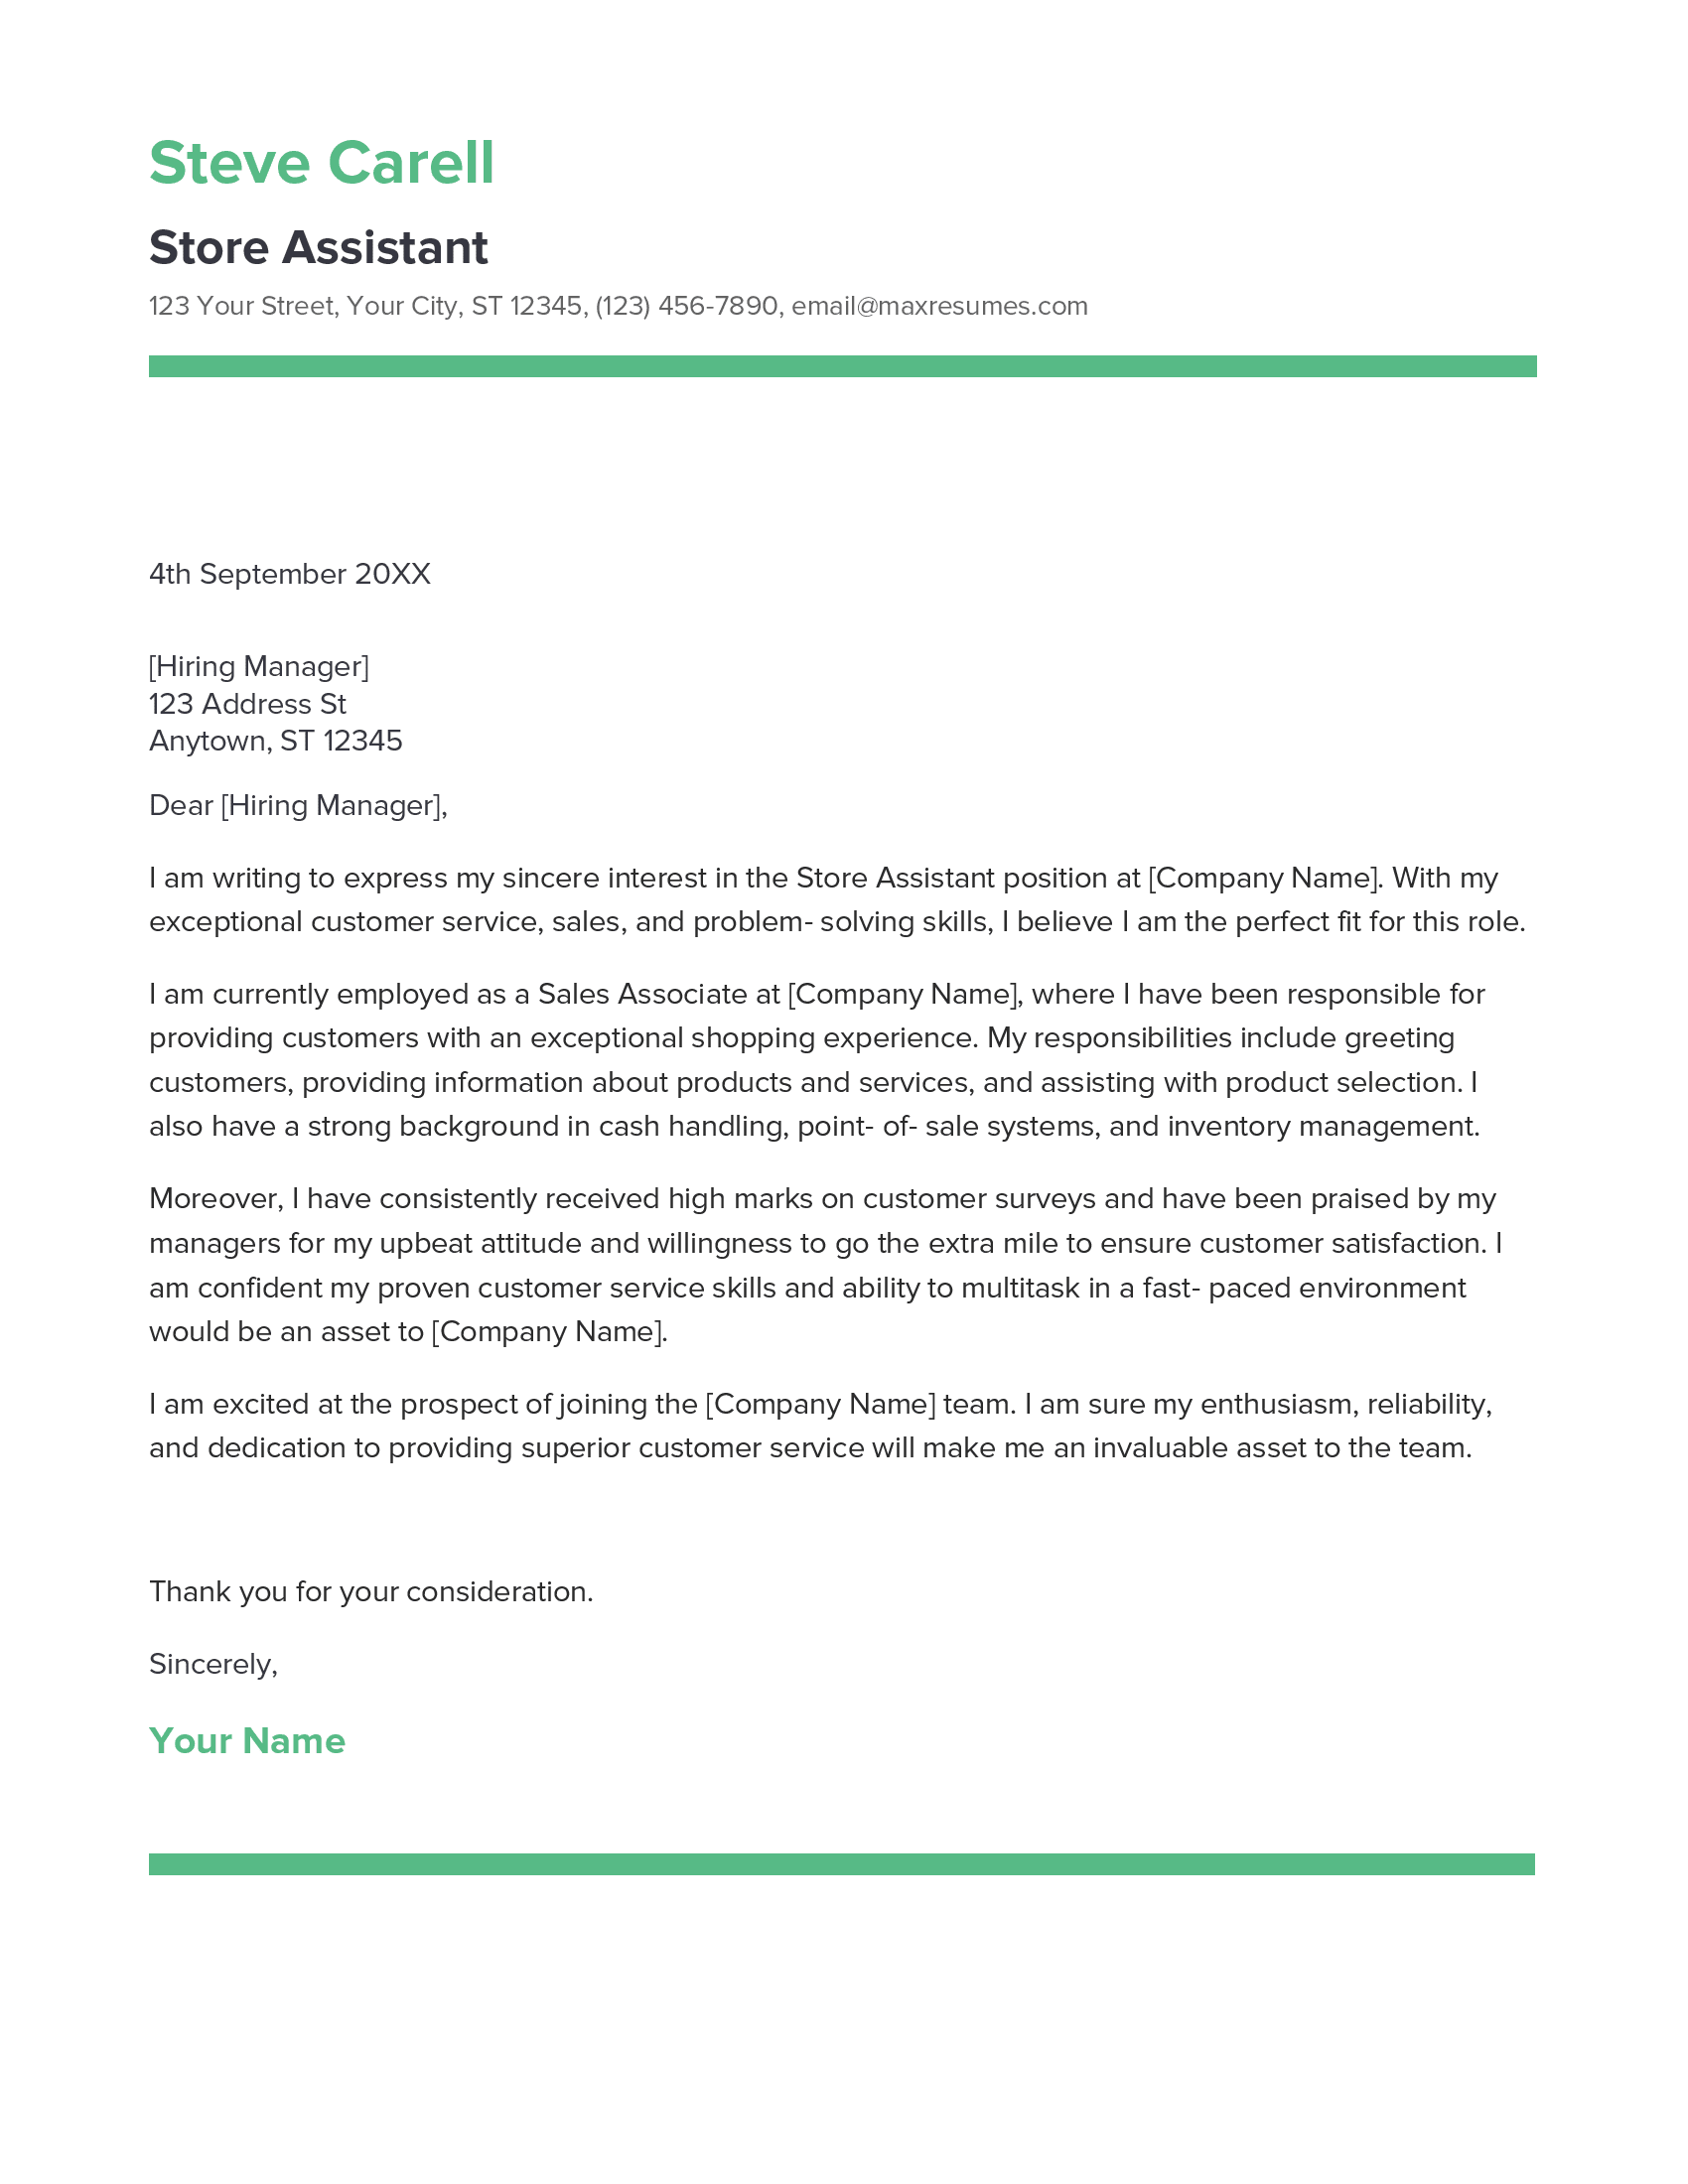 Store Assistant Cover Letter Example